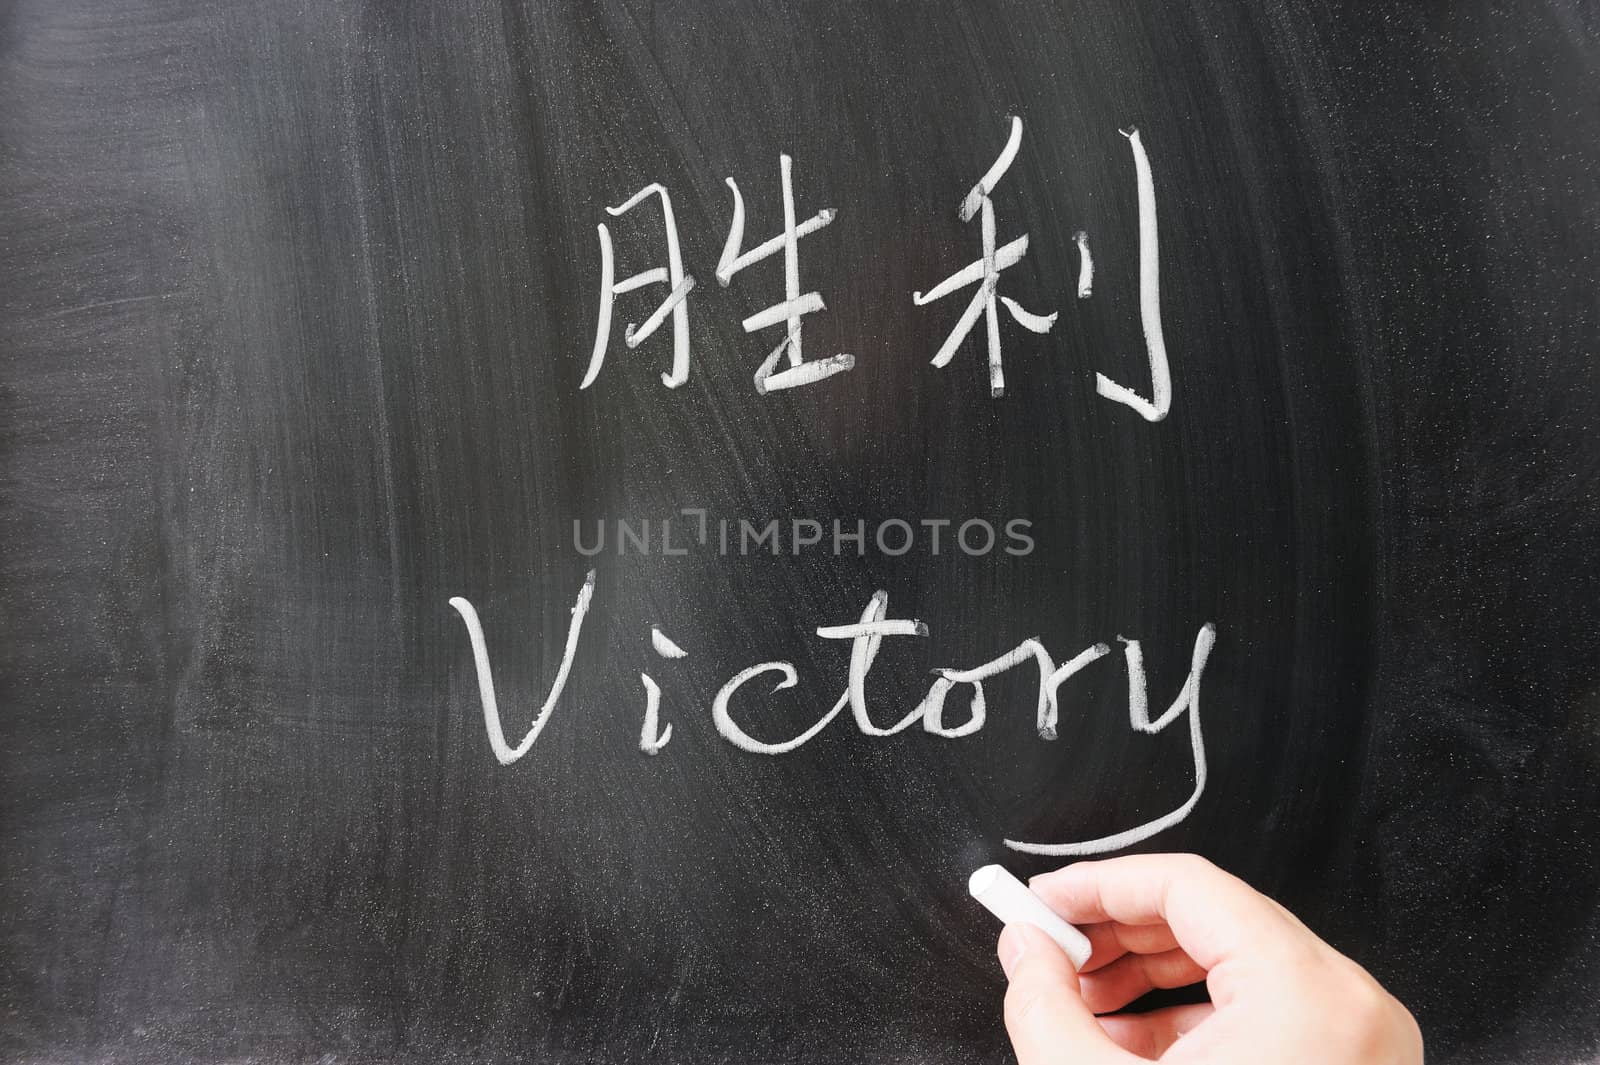 Victory word in Chinese and English written on the chalkboard